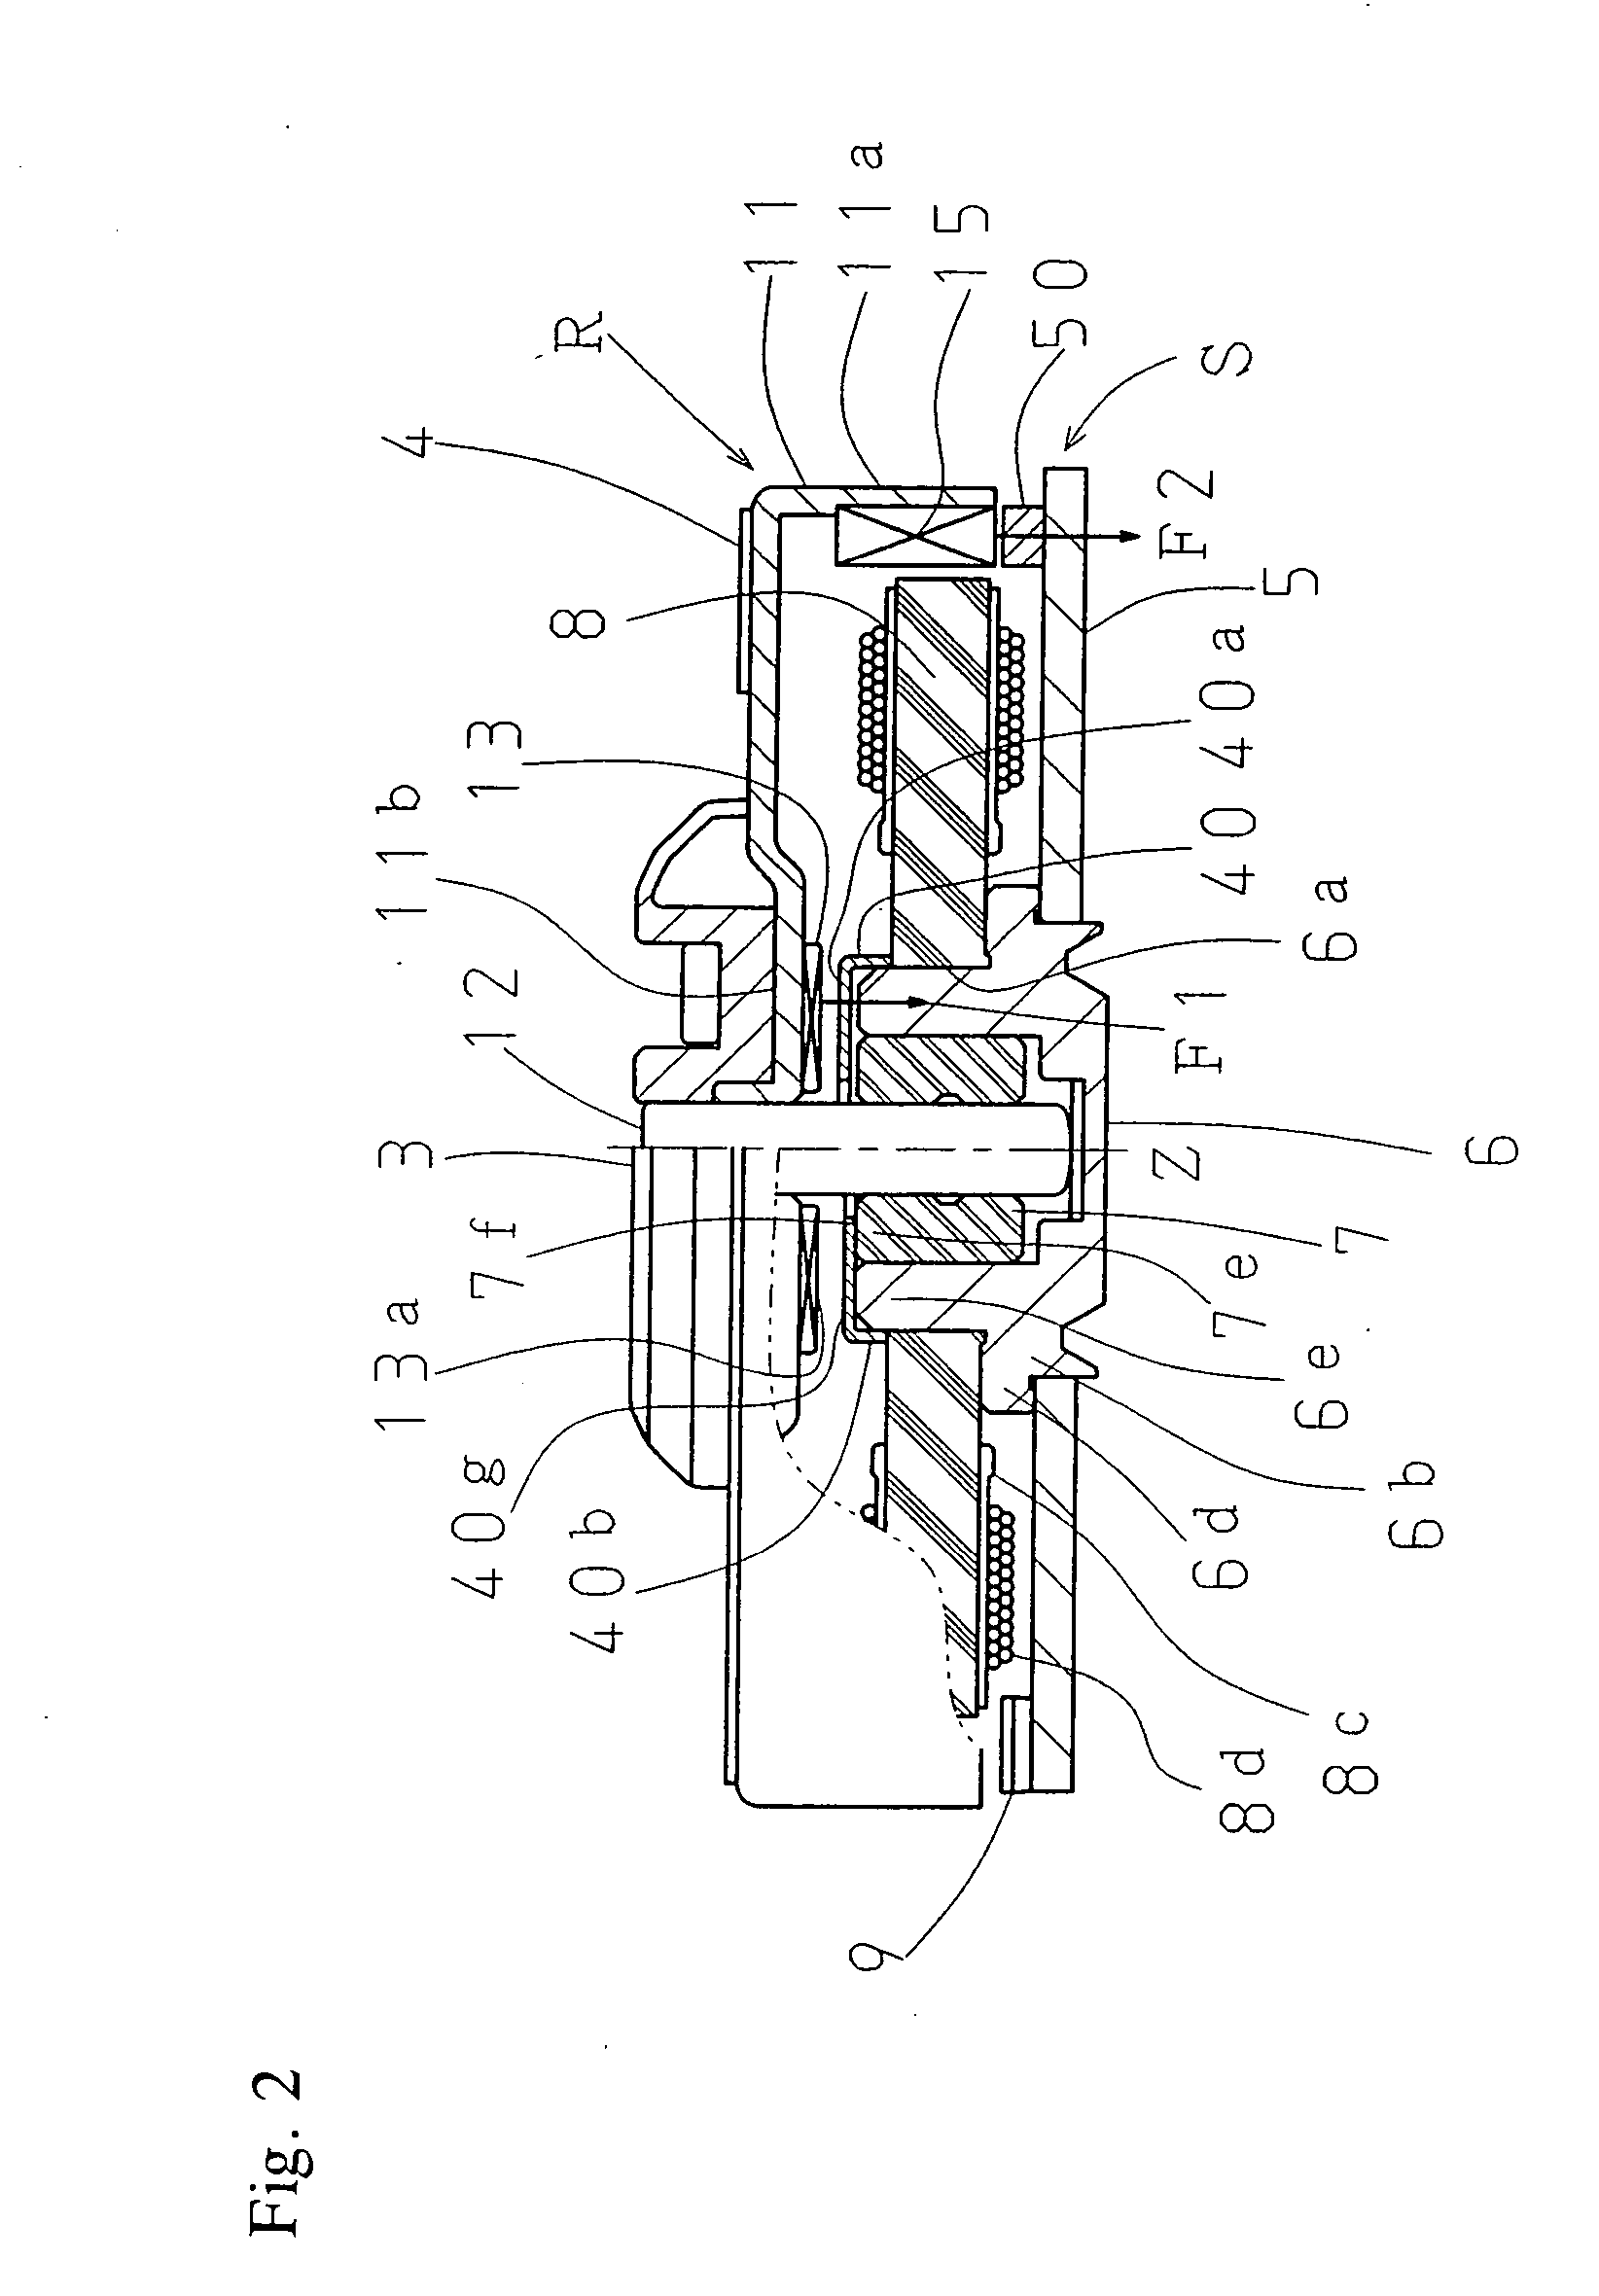 Spindle motor and disk drive unit